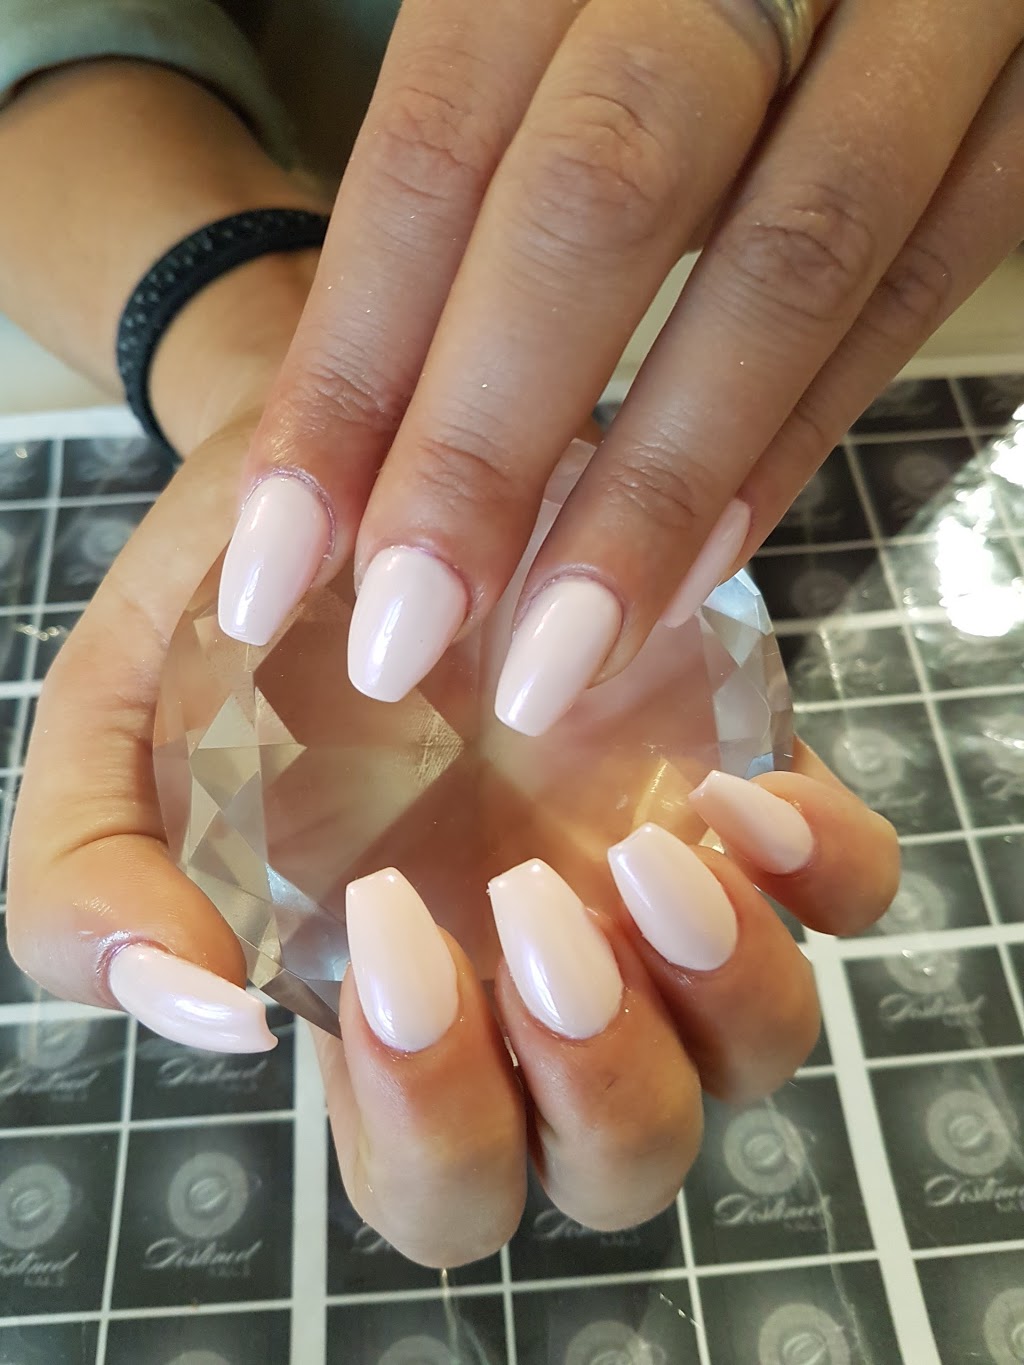 Destined Nails | 1025 King St E #103, Cambridge, ON N3H 3P4, Canada | Phone: (519) 239-9900